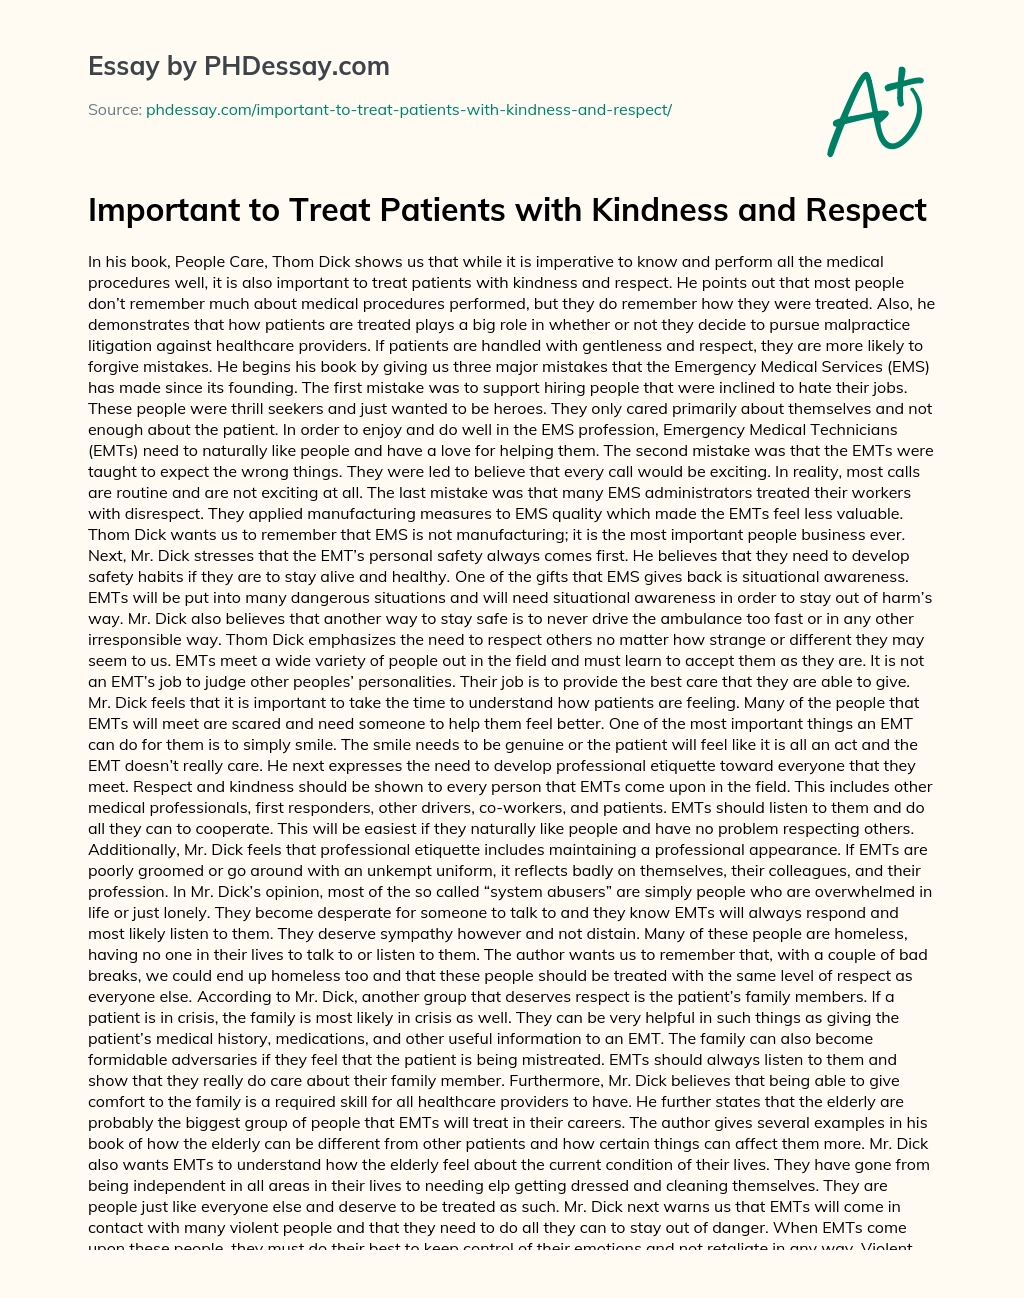 Important to Treat Patients with Kindness and Respect essay